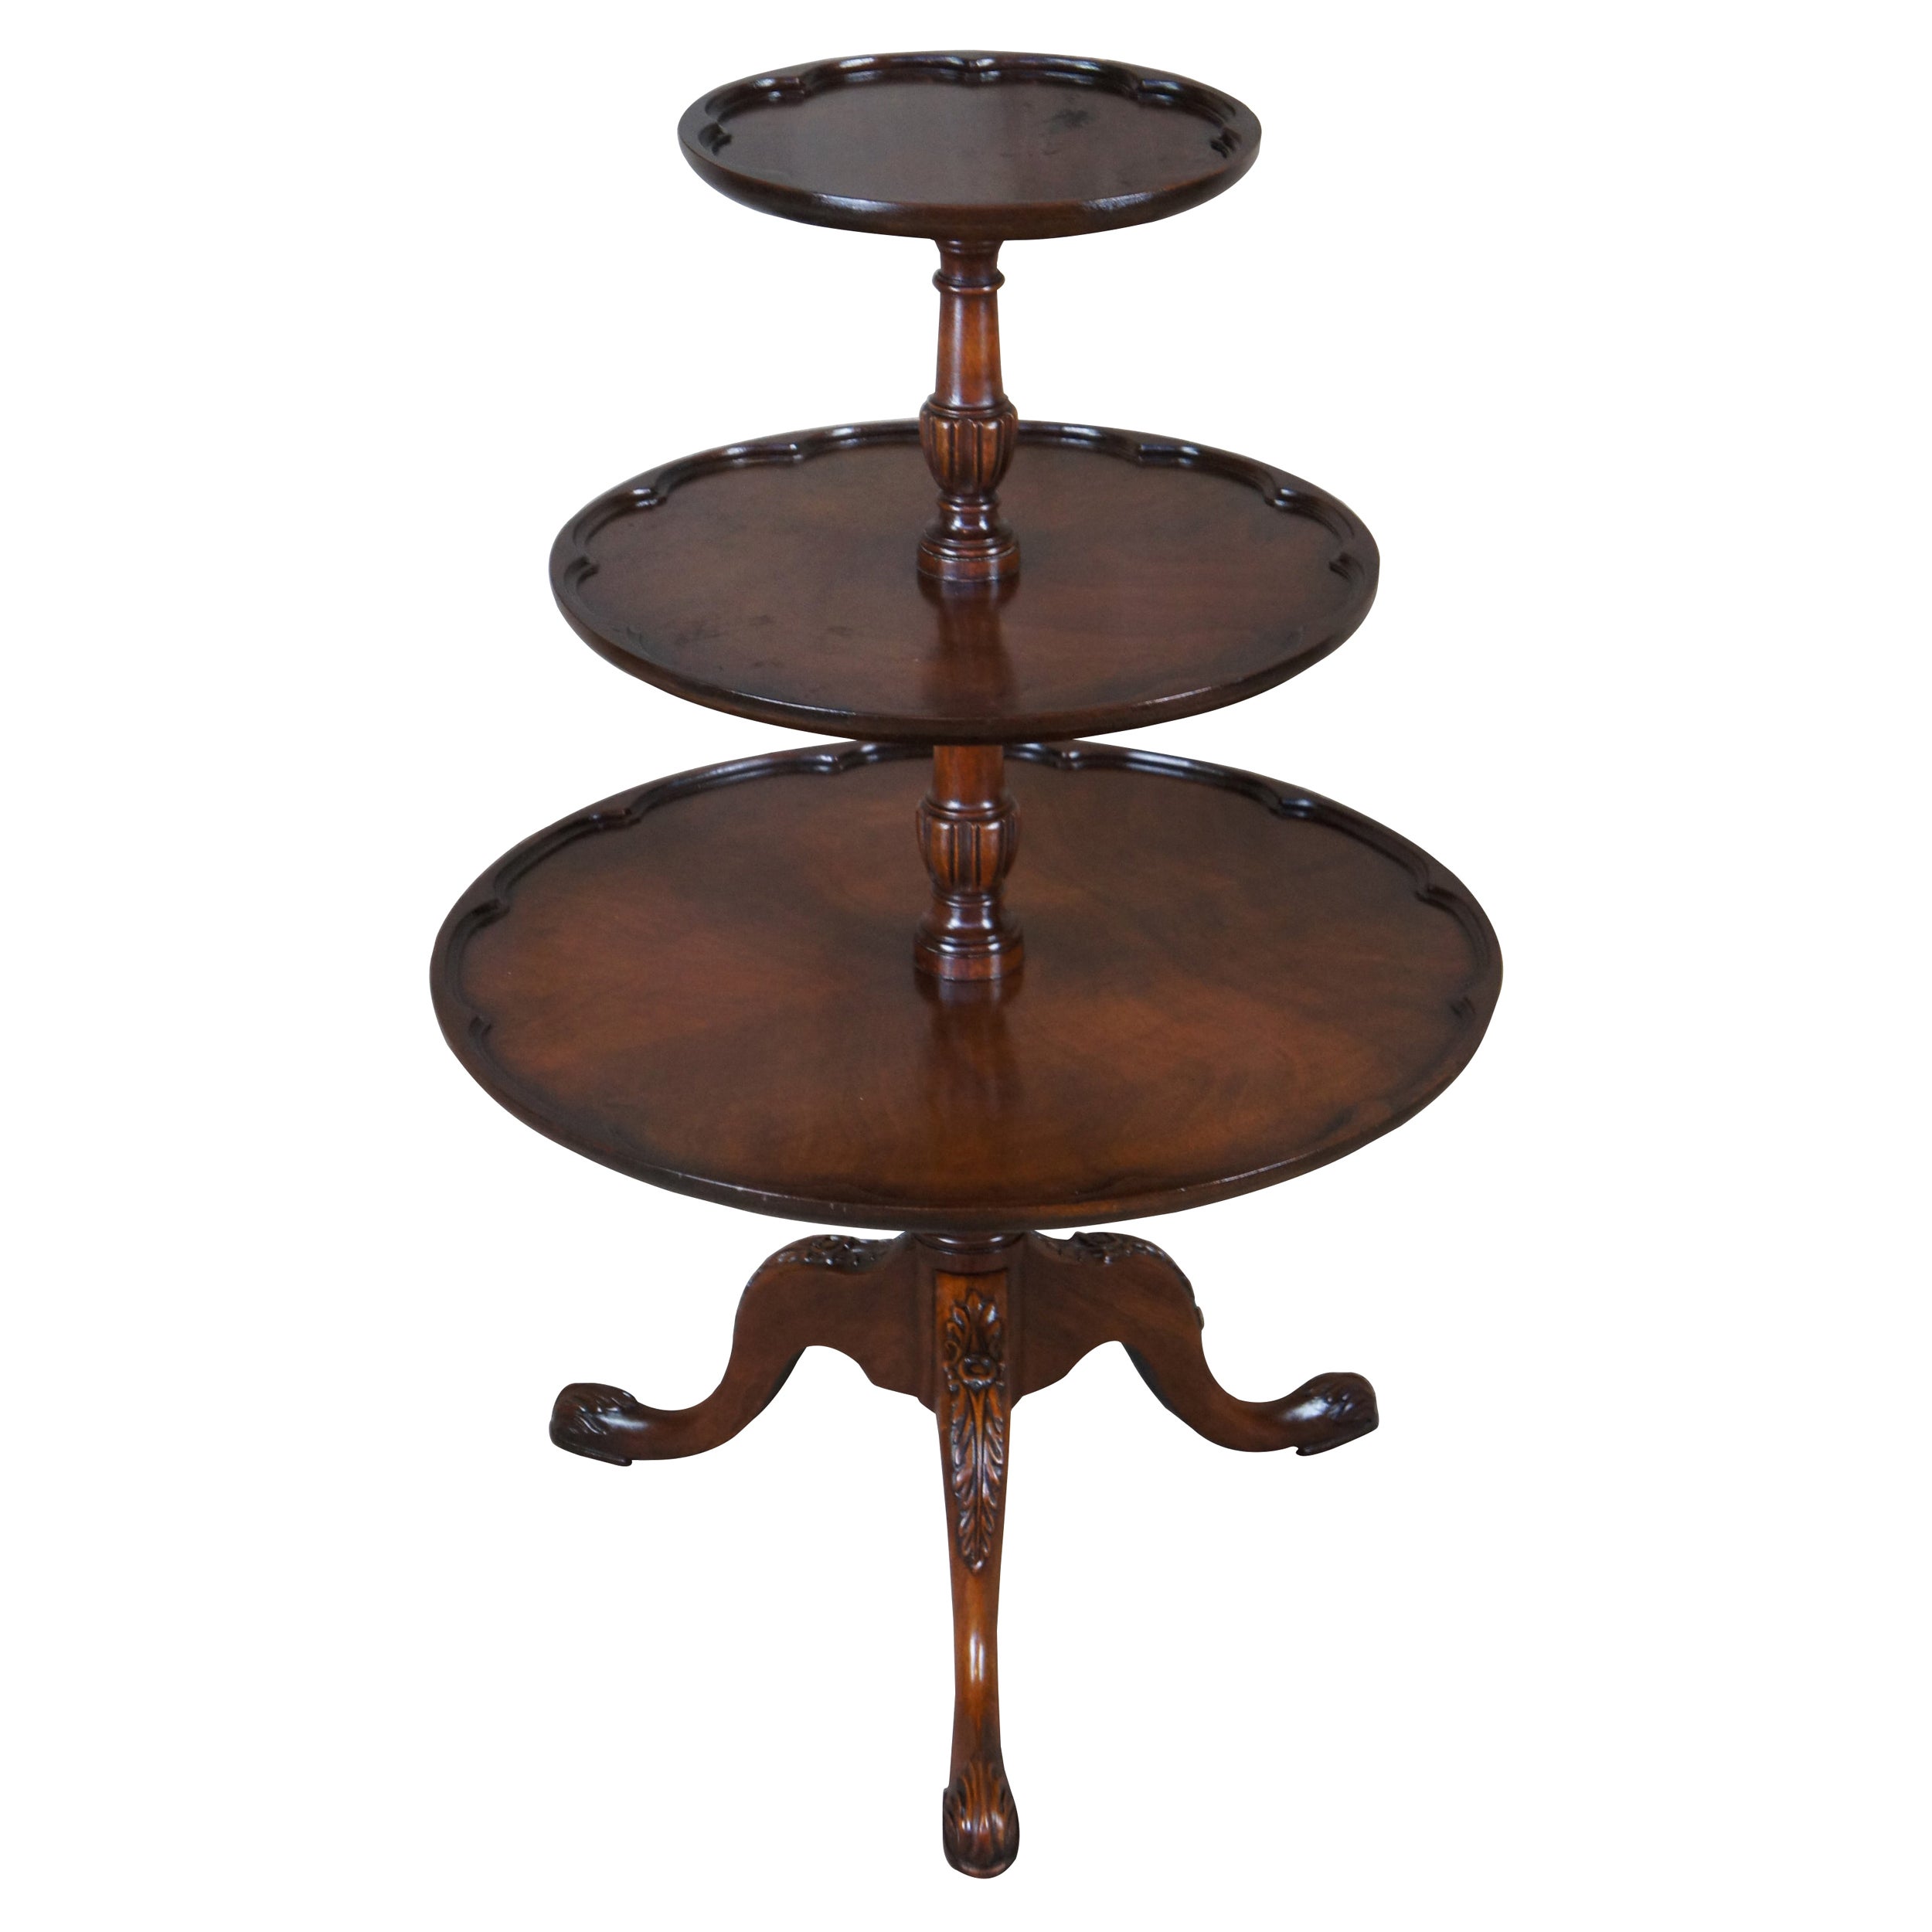 Chippendale 3 Tiered Mahogany Pie Crust Table Dumbwaiter Butler Pedestal Stand